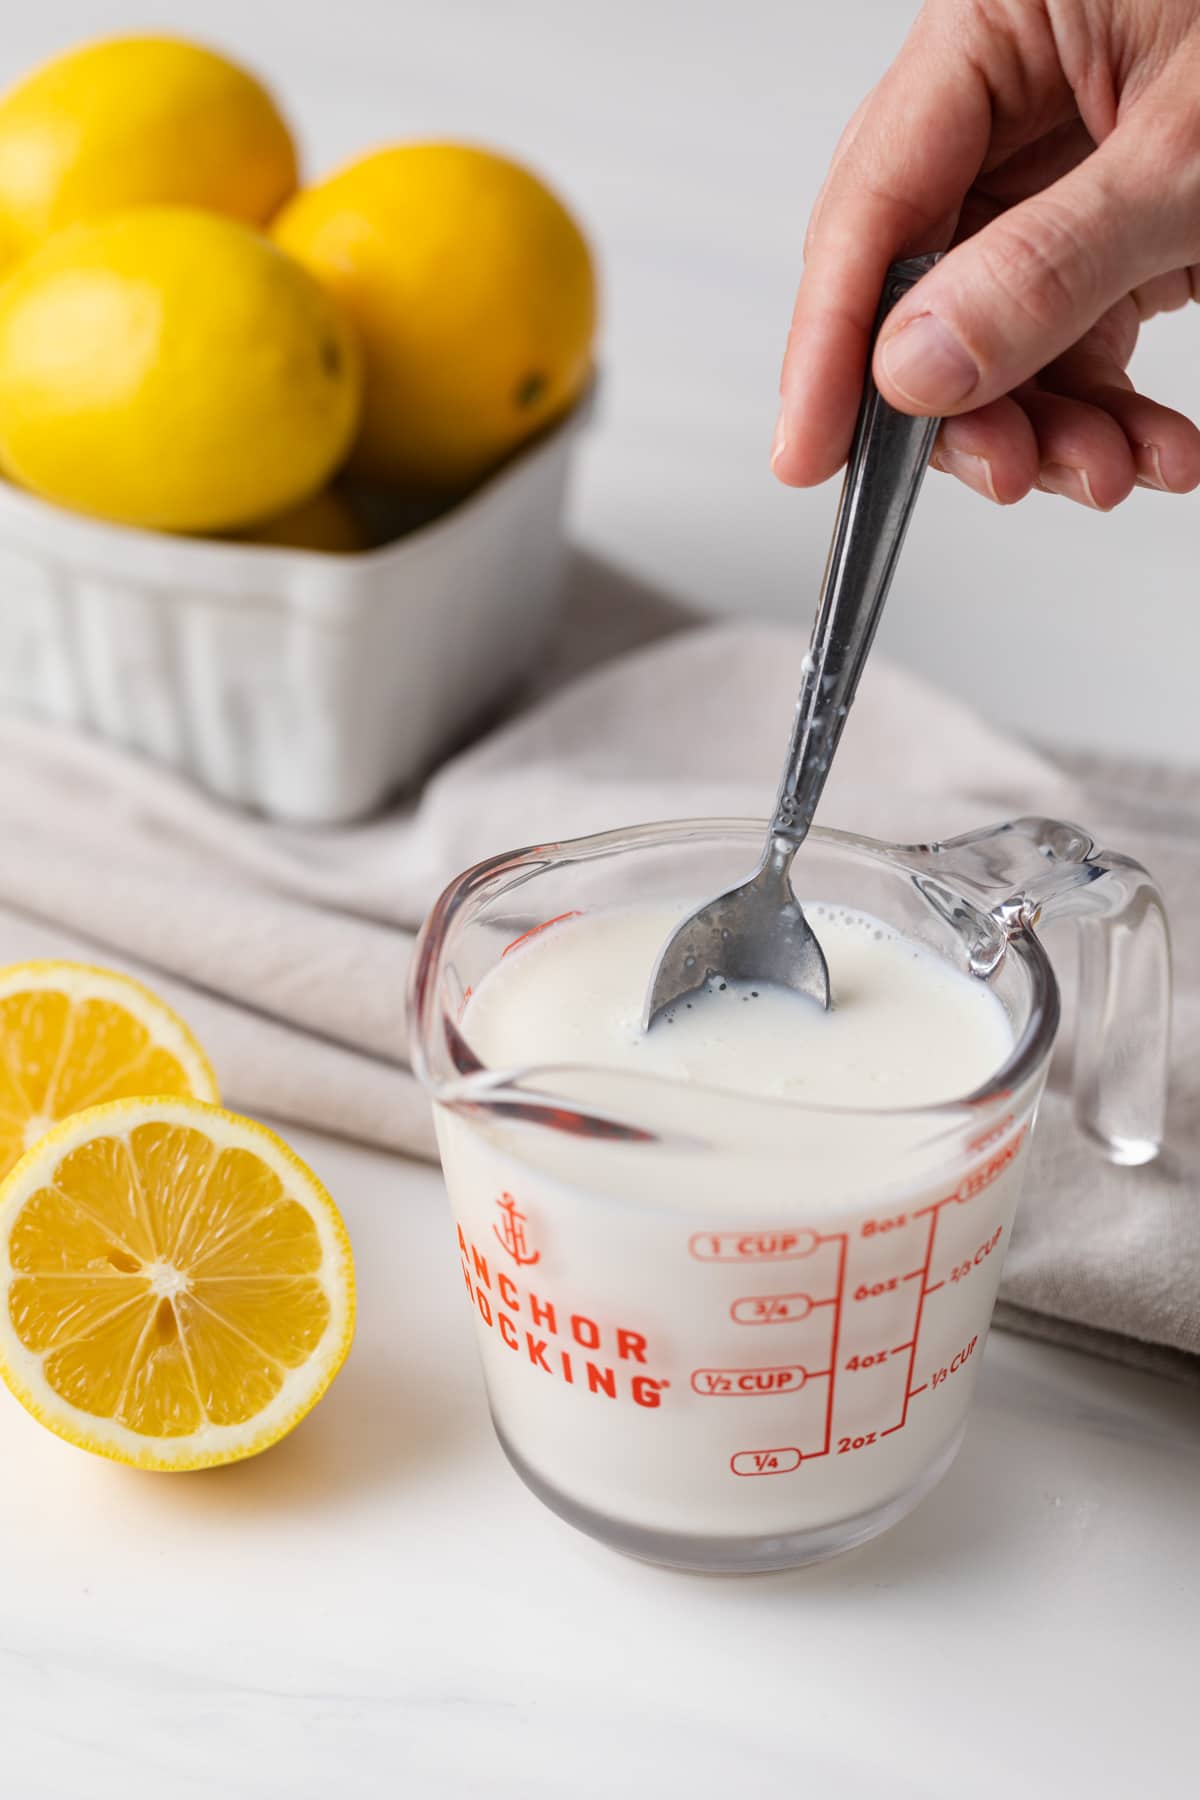 spoon stirring buttermilk substitute in glass measuring cup with lemons and napkin in background